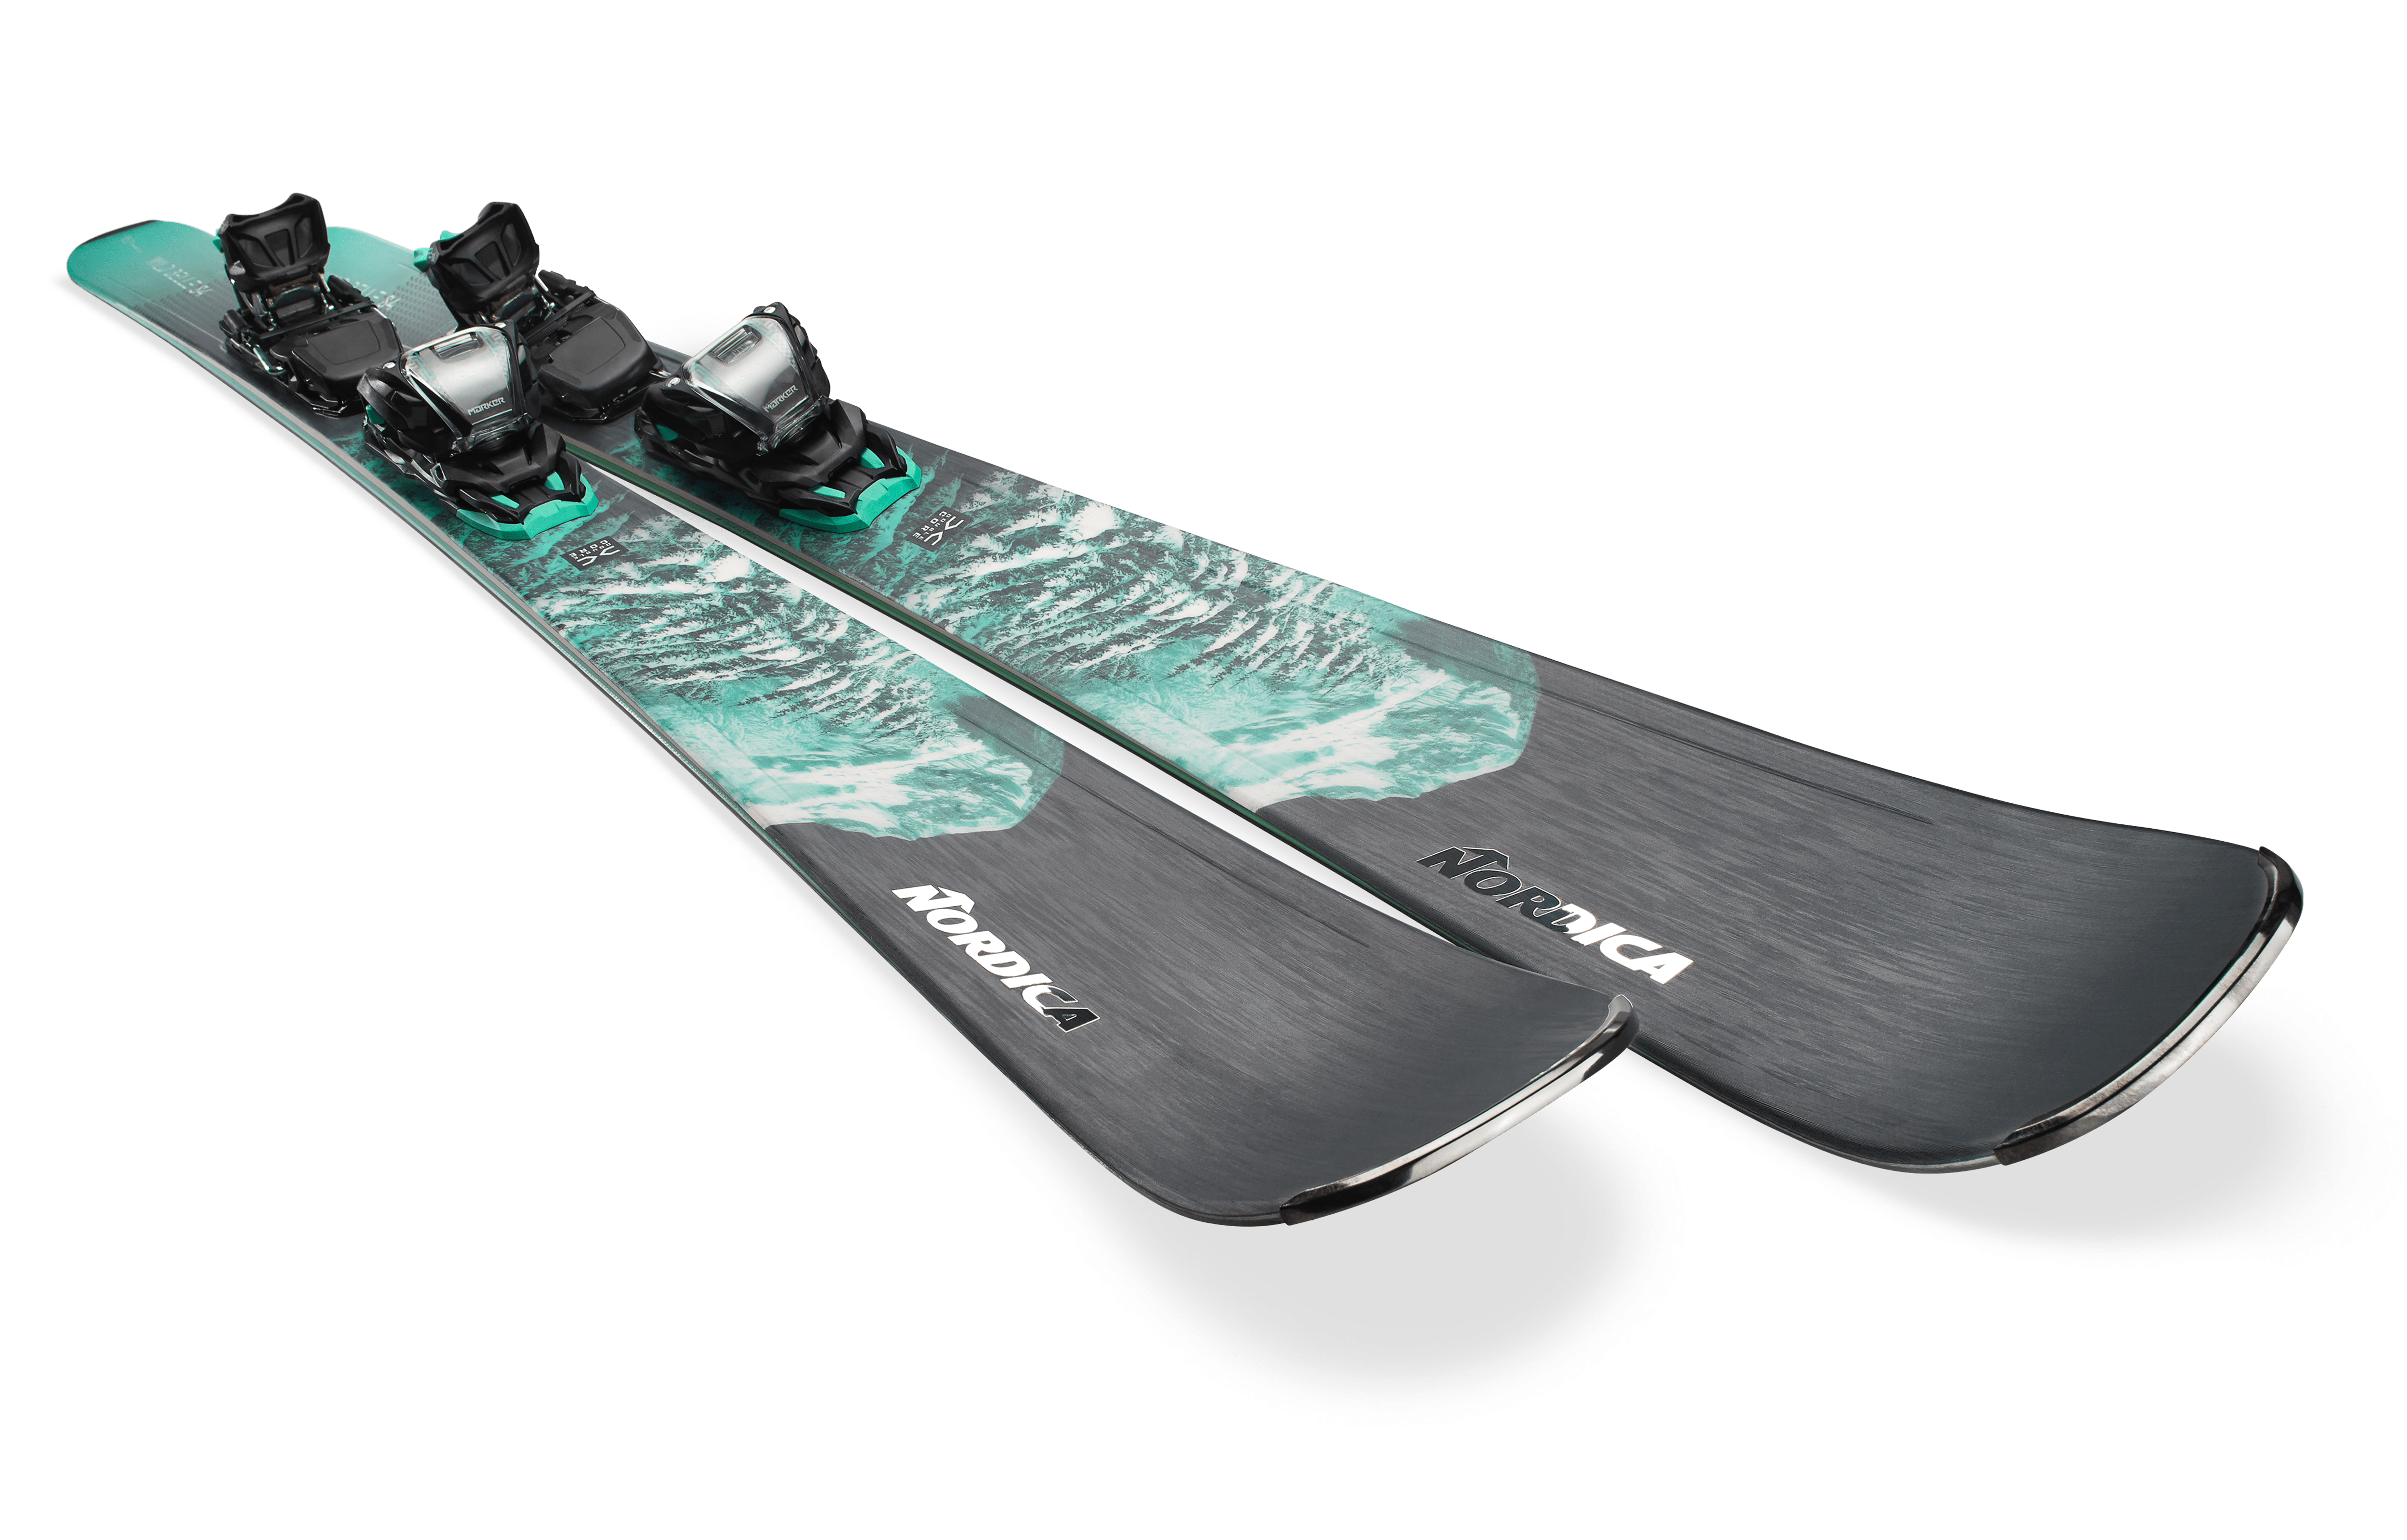 Take control of the entire mountain with Nordica's all-new Wild Belle DC84. Equipped with a wider waist, this all-mountain ski provides female skiers with the confidence they need to tackle any terrain and all conditions.